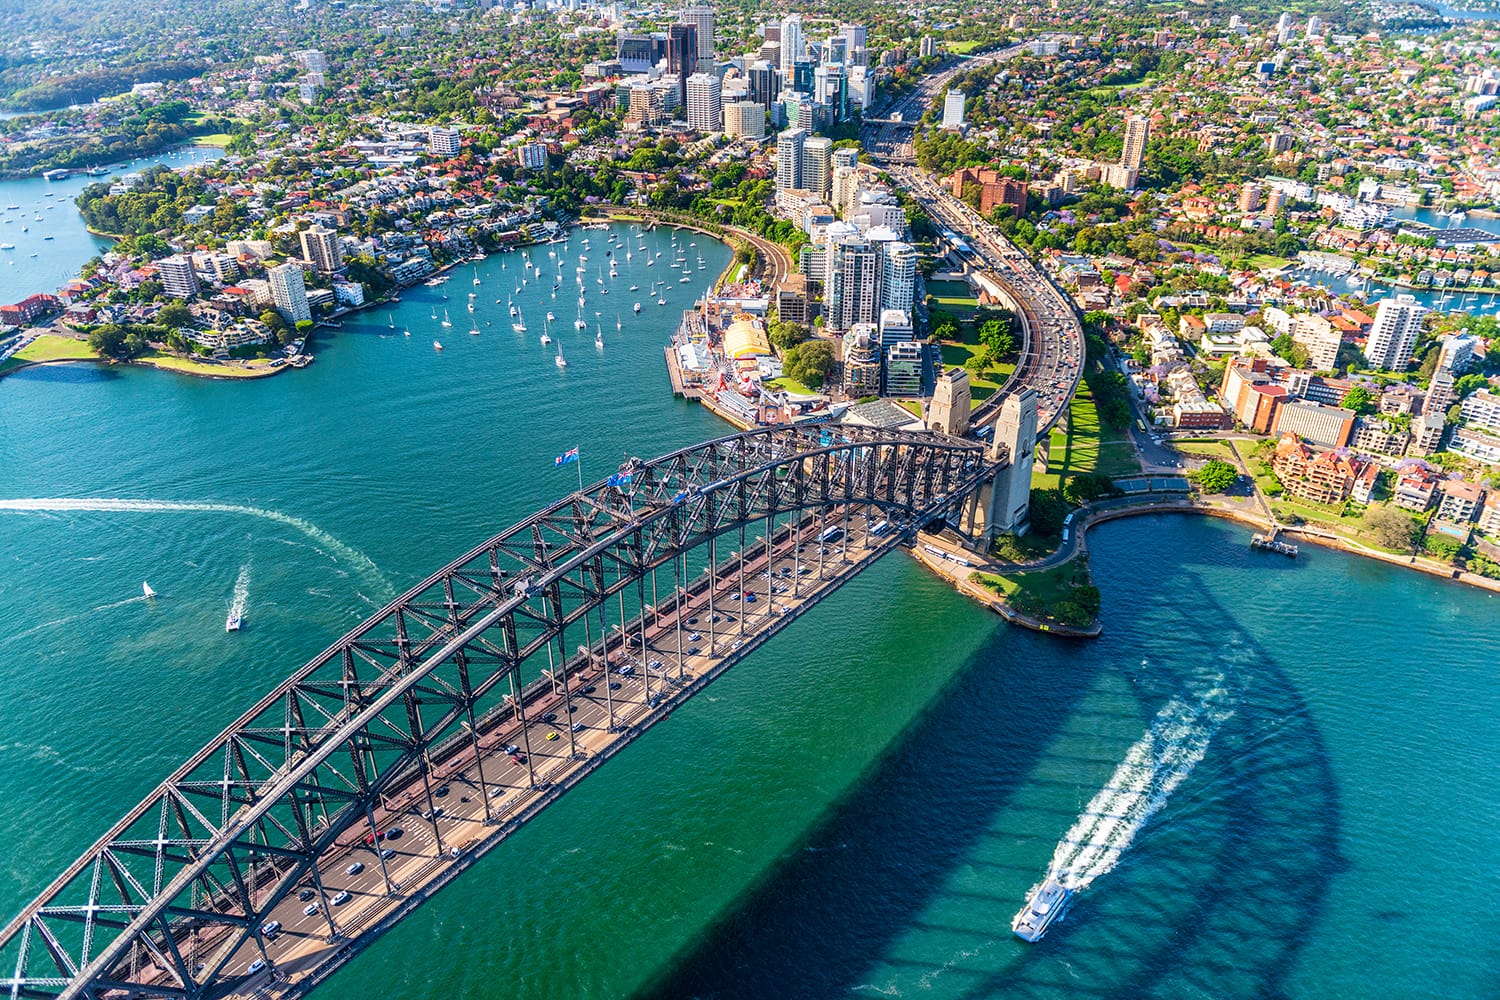 Helicopter view of Sydney Harbor Bridge and Lavender Bay, New South Wales, Australia.